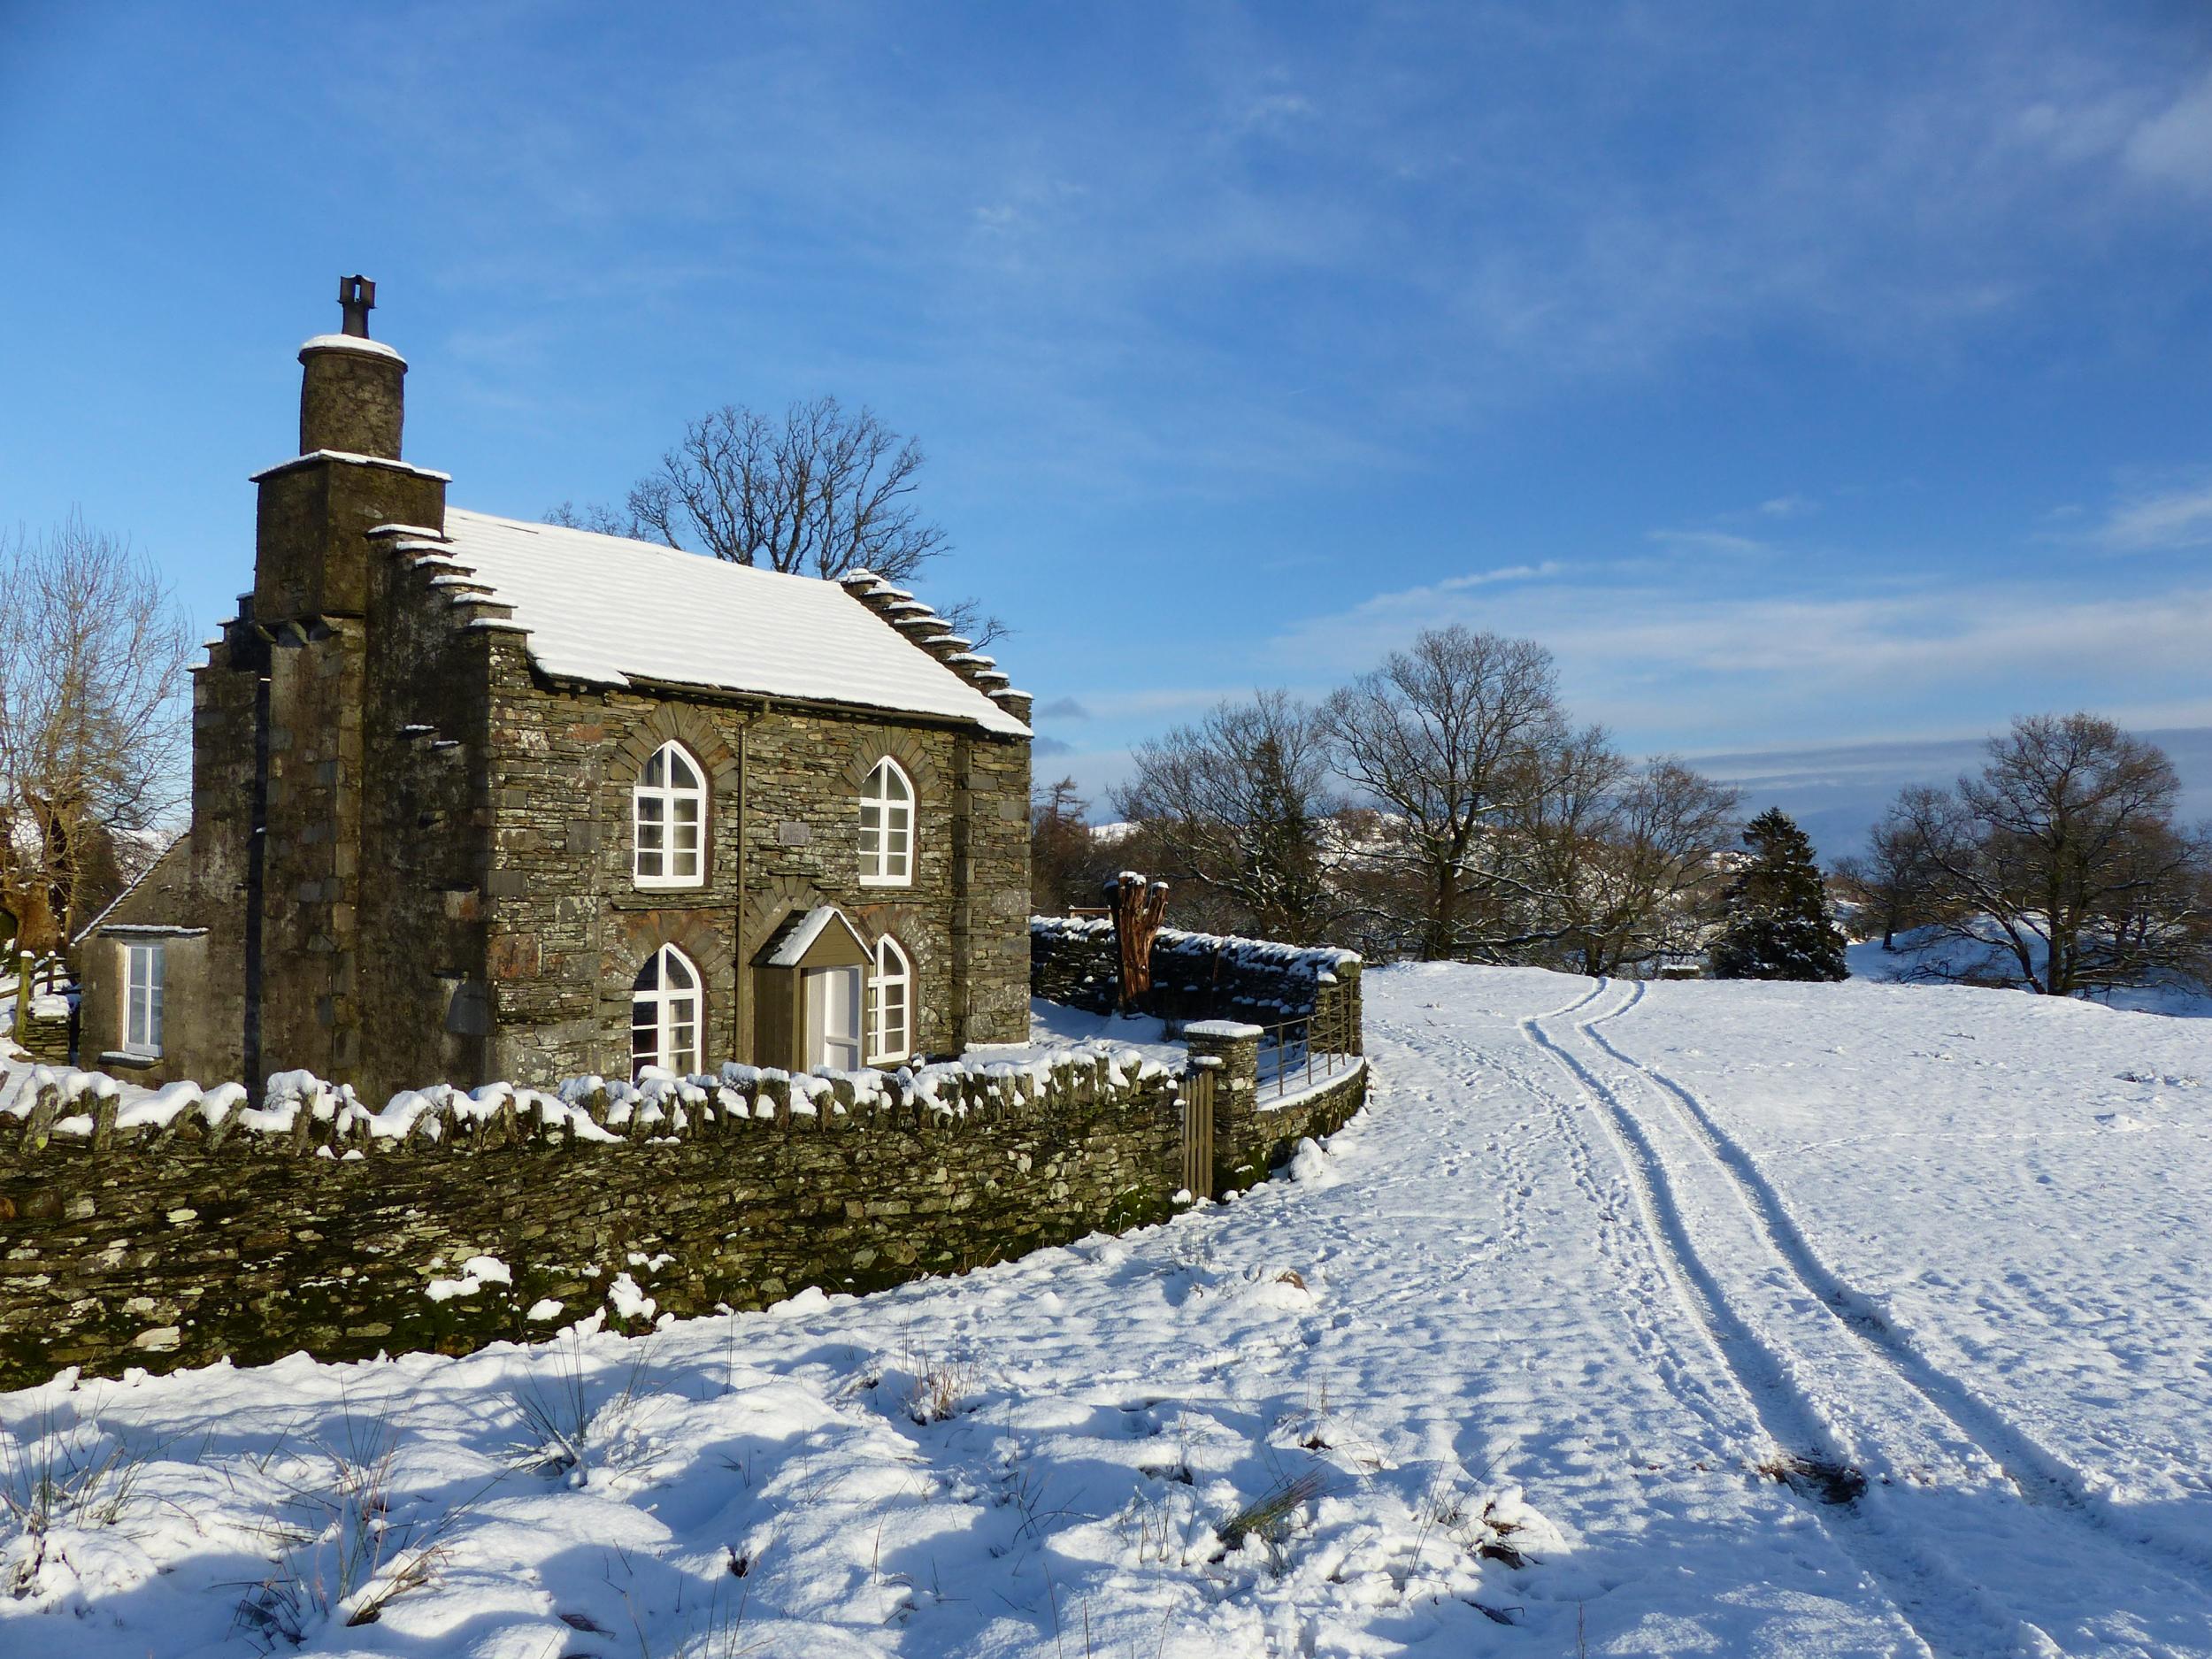 Rose Castle Cottage in the snow